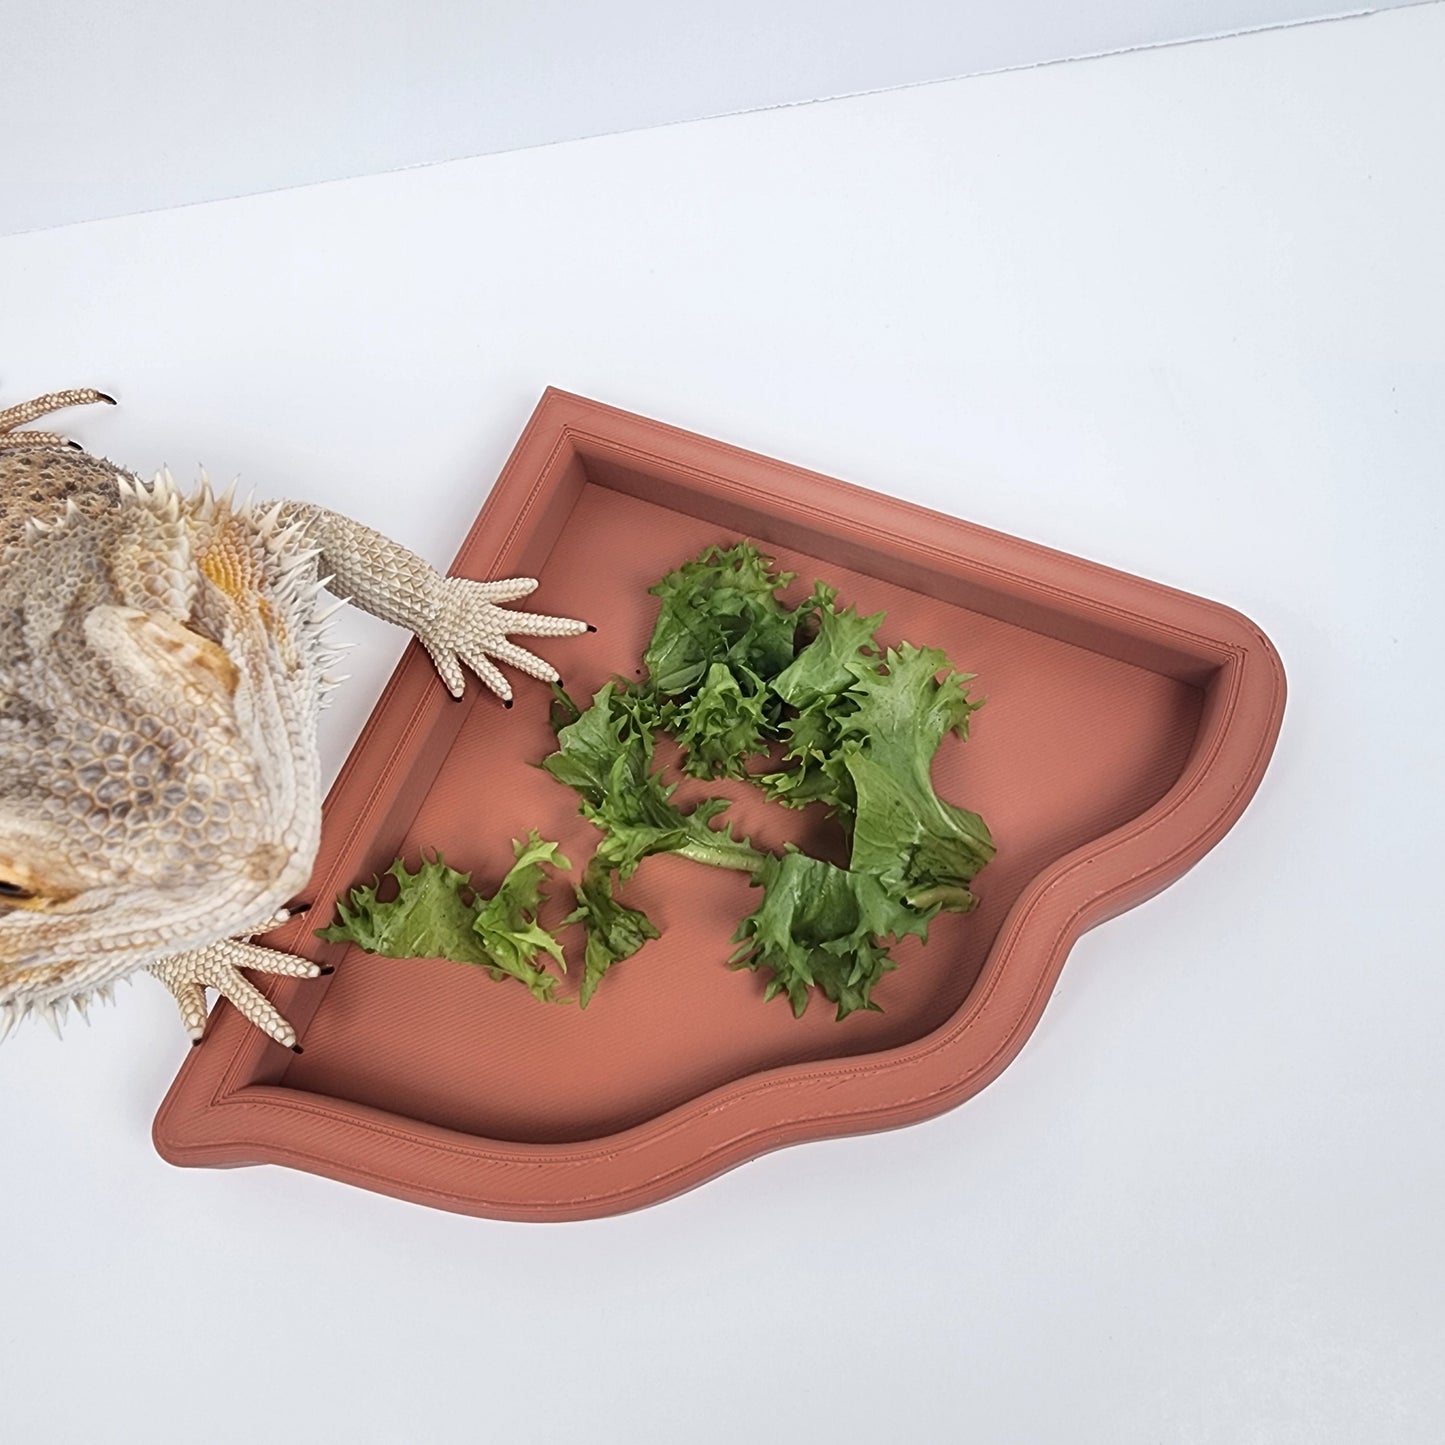 Corner salad/feeding dish for bearded dragons and leopard geckos/ accessories and decor